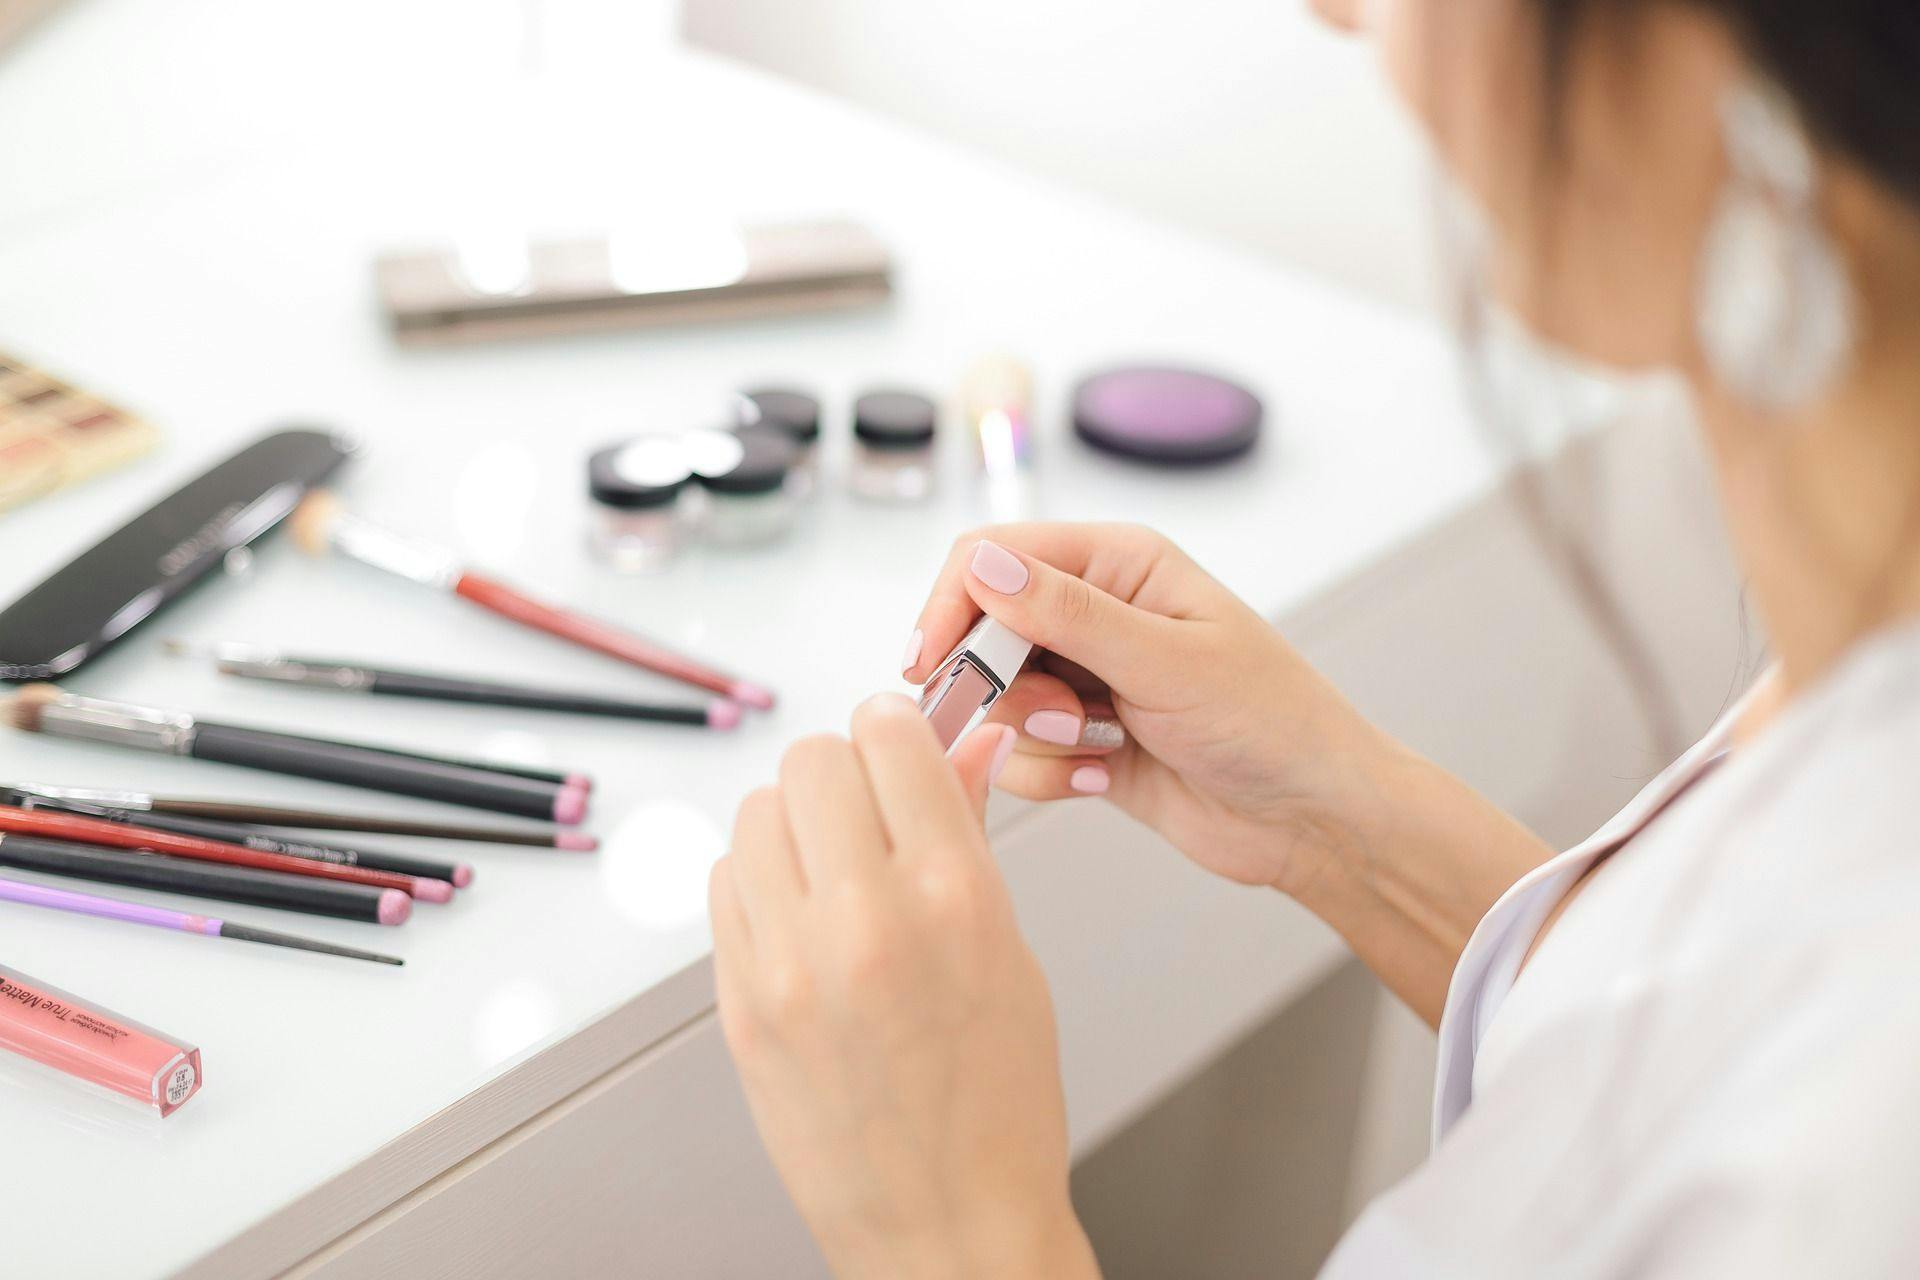 Study Details "Widespread" Use of Endocrine-Disrupting Chemicals in North American Cosmetic Products